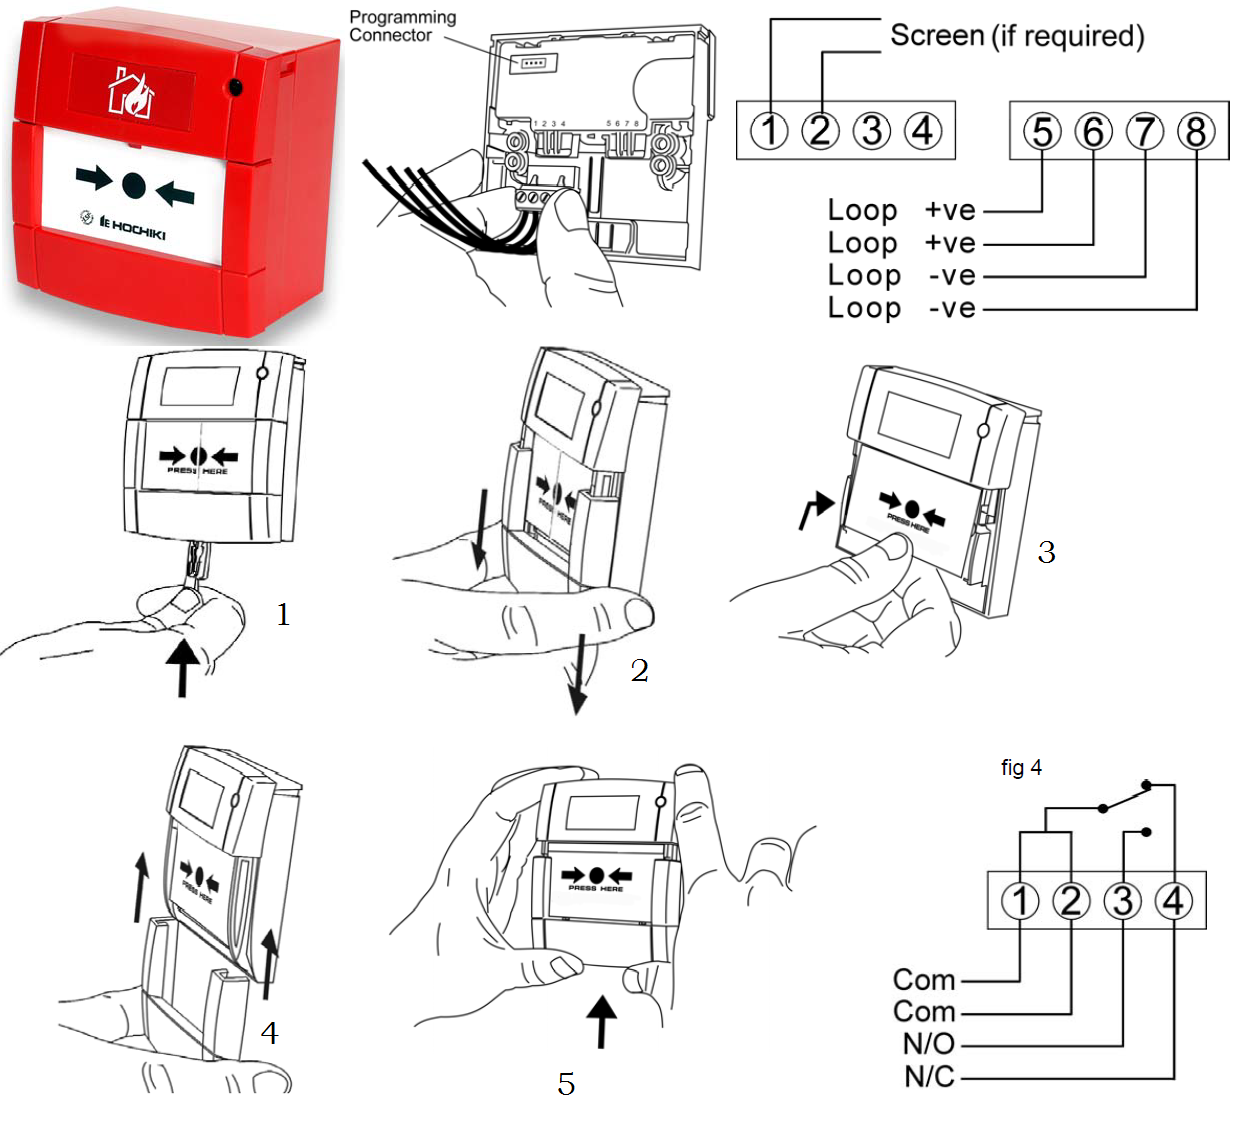 Addressable Smoke Detector Wiring Diagram from wiringall.com